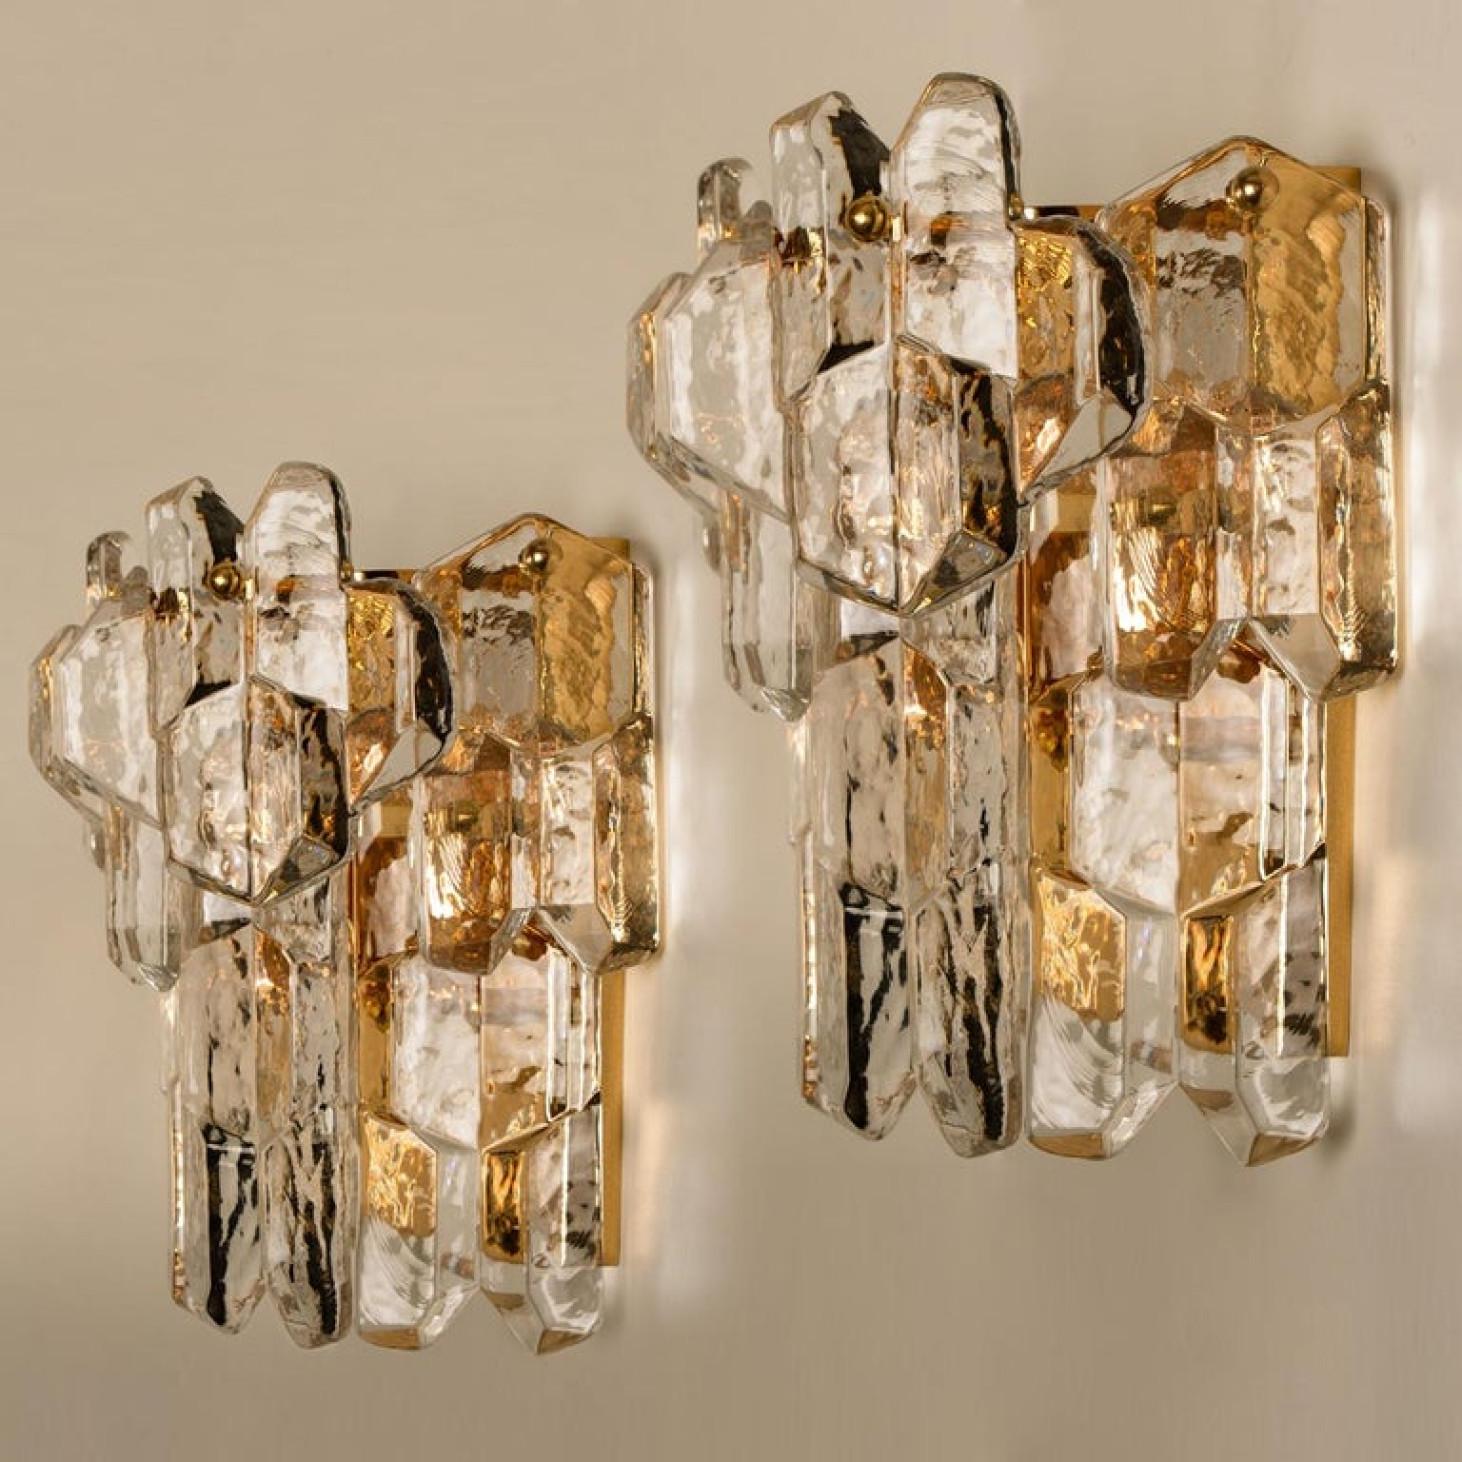 Austrian Pair of J.T. Kalmar 'Palazzo' Wall Light Fixtures Brass and Glass, 1970s For Sale